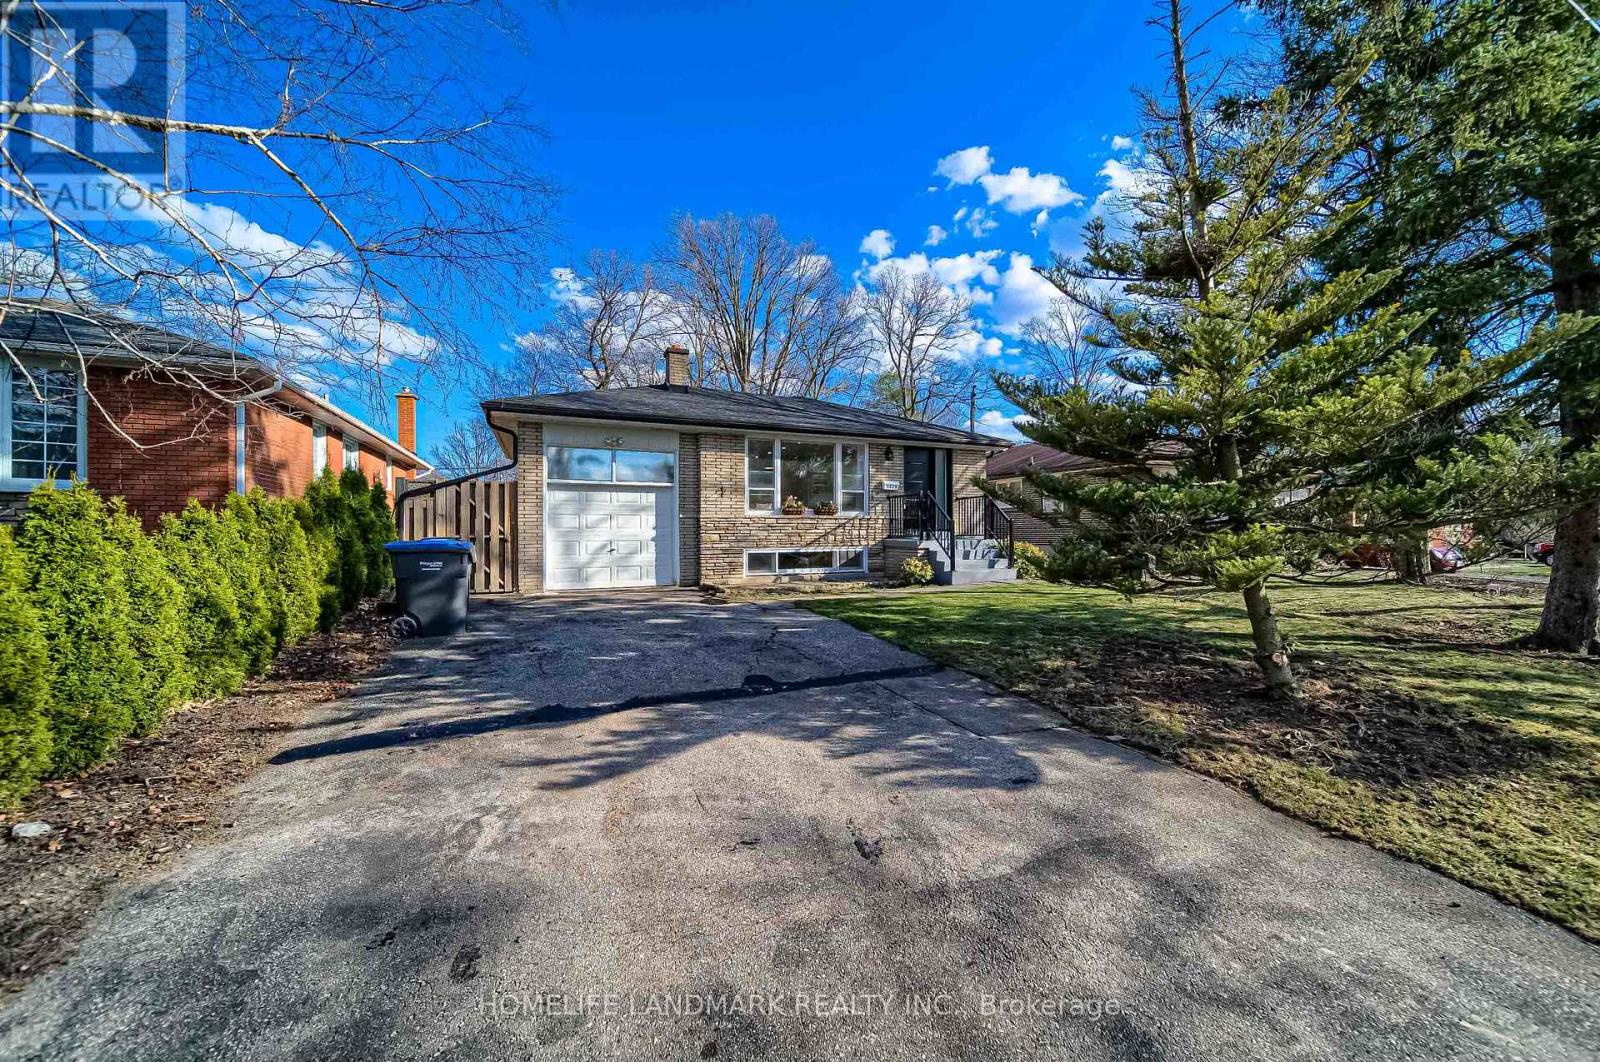 1426 Monaghan Circle, Mississauga, 5 Bedrooms Bedrooms, ,2 BathroomsBathrooms,Single Family,For Sale,Monaghan,W8182062